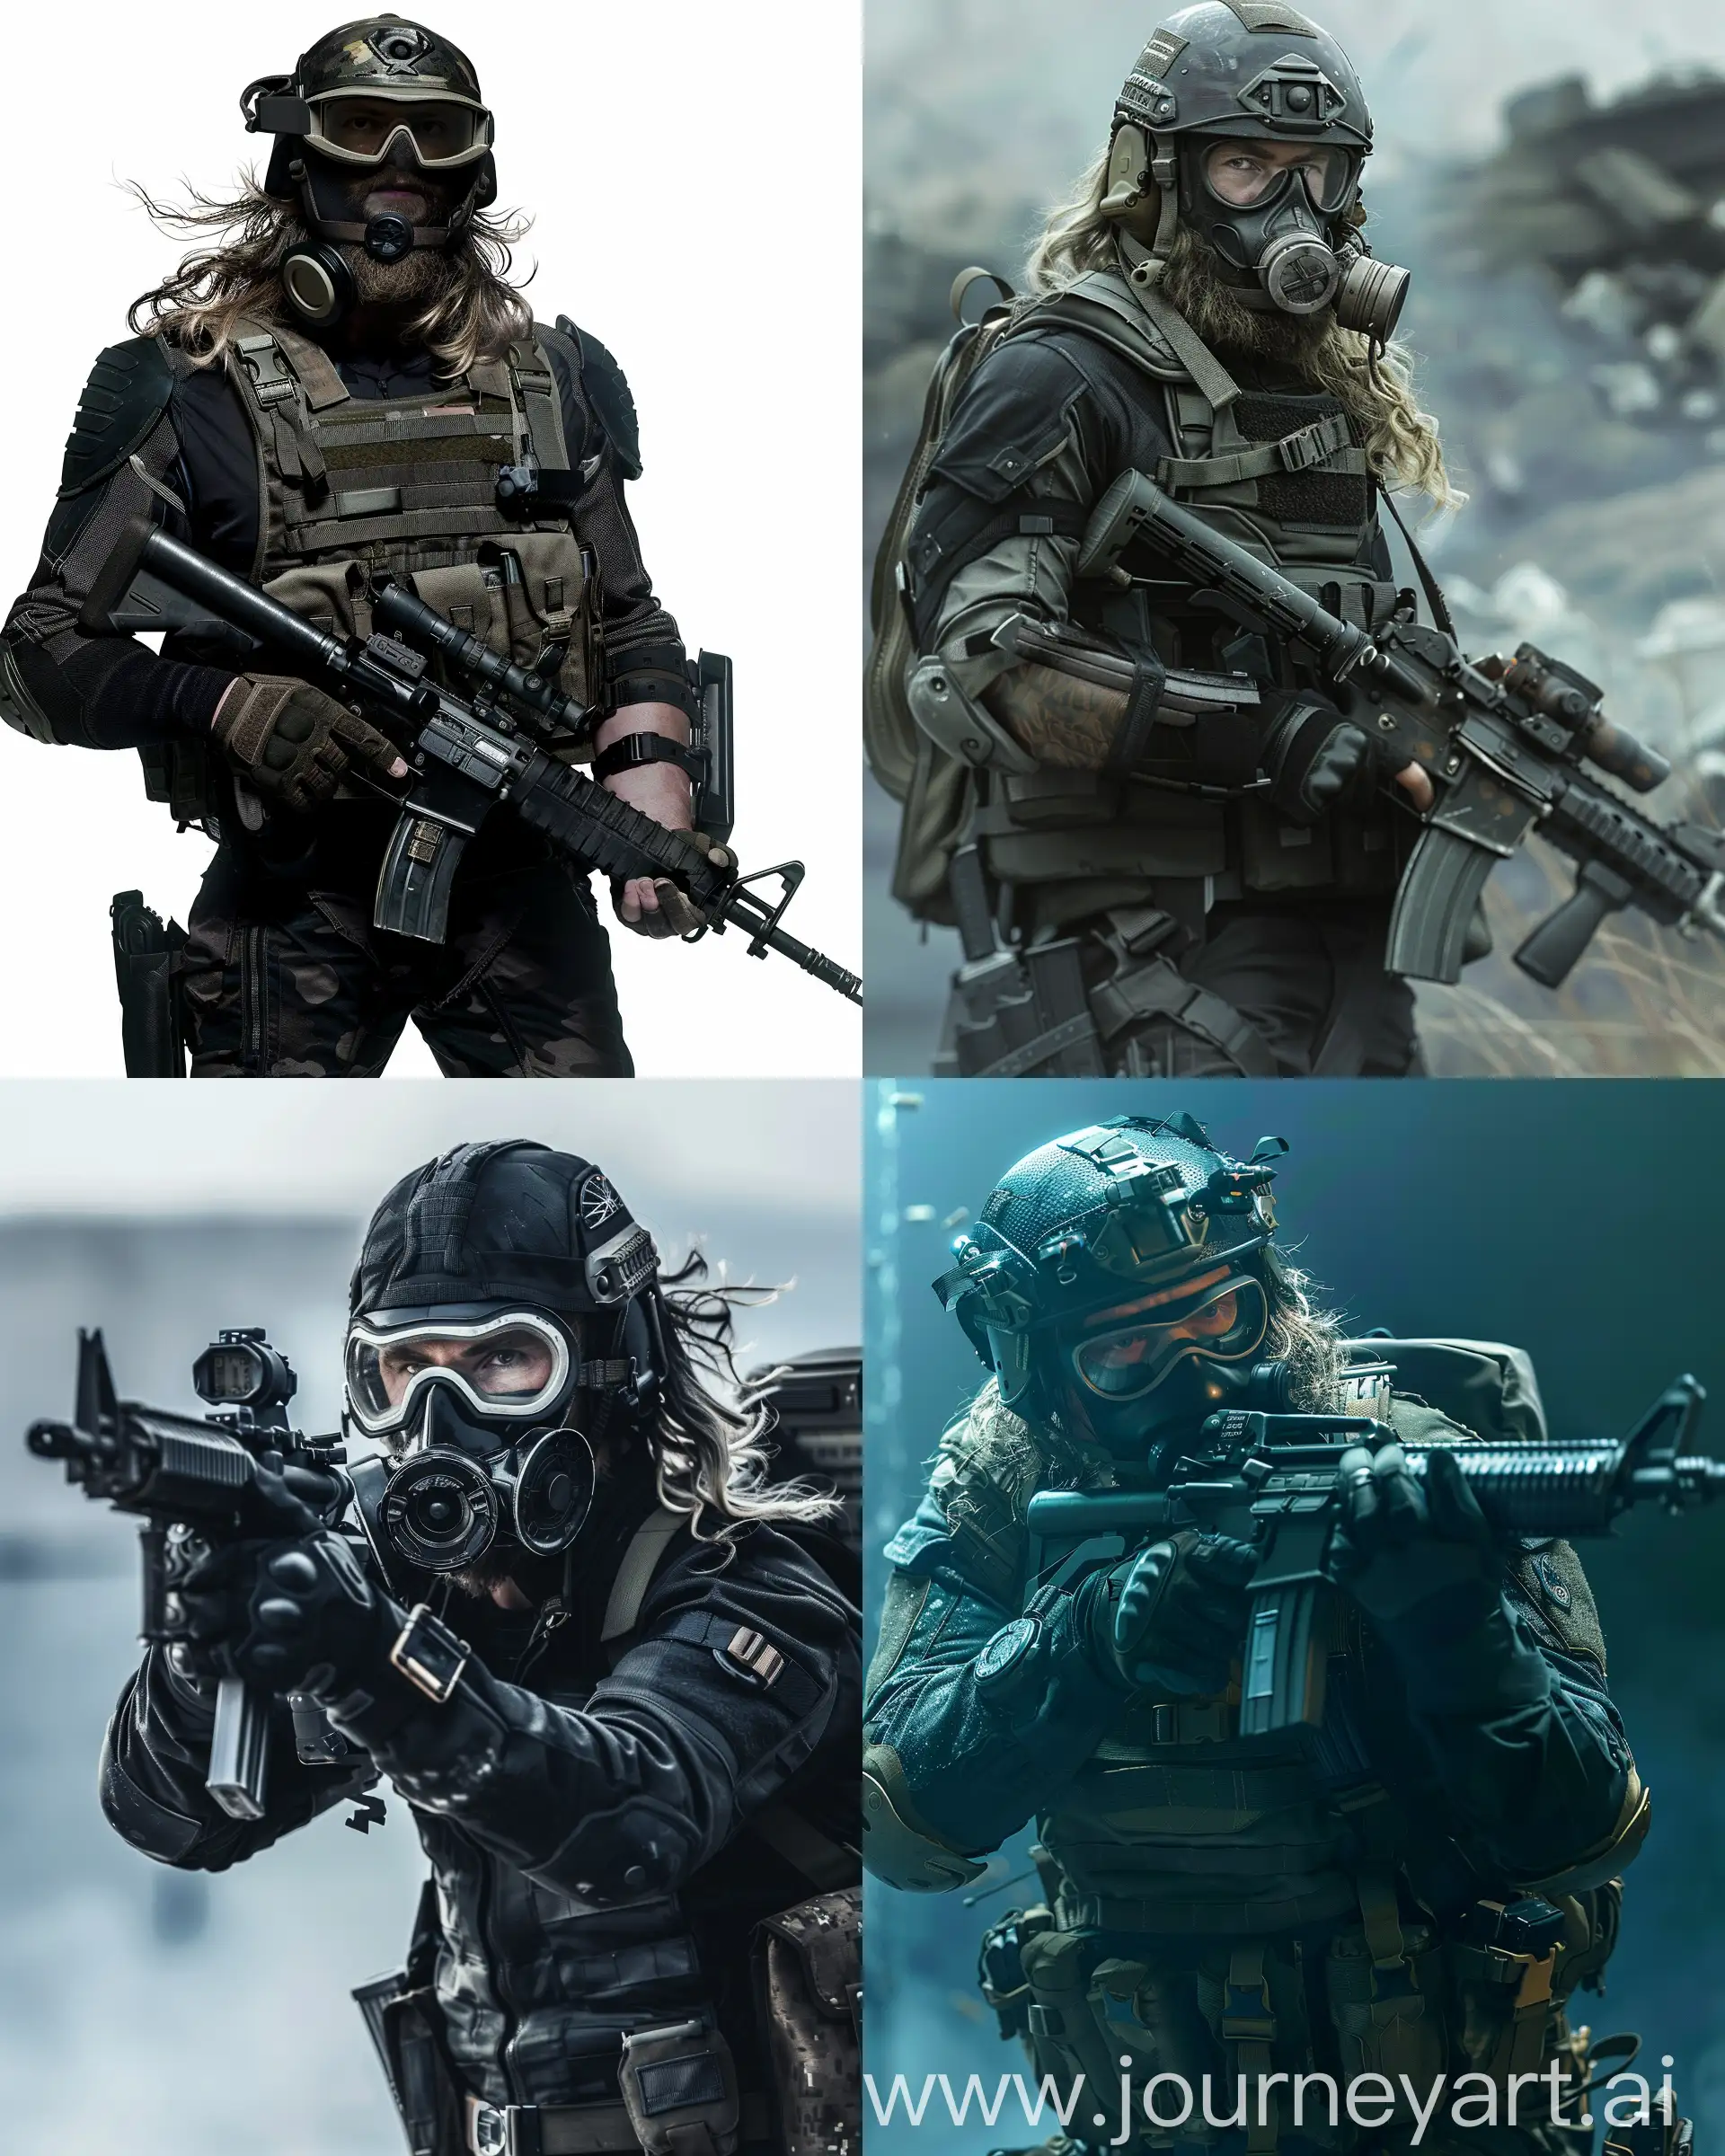 Thor-in-Call-of-Duty-Black-Ops-Military-Uniform-with-Gas-Mask-and-Rifle